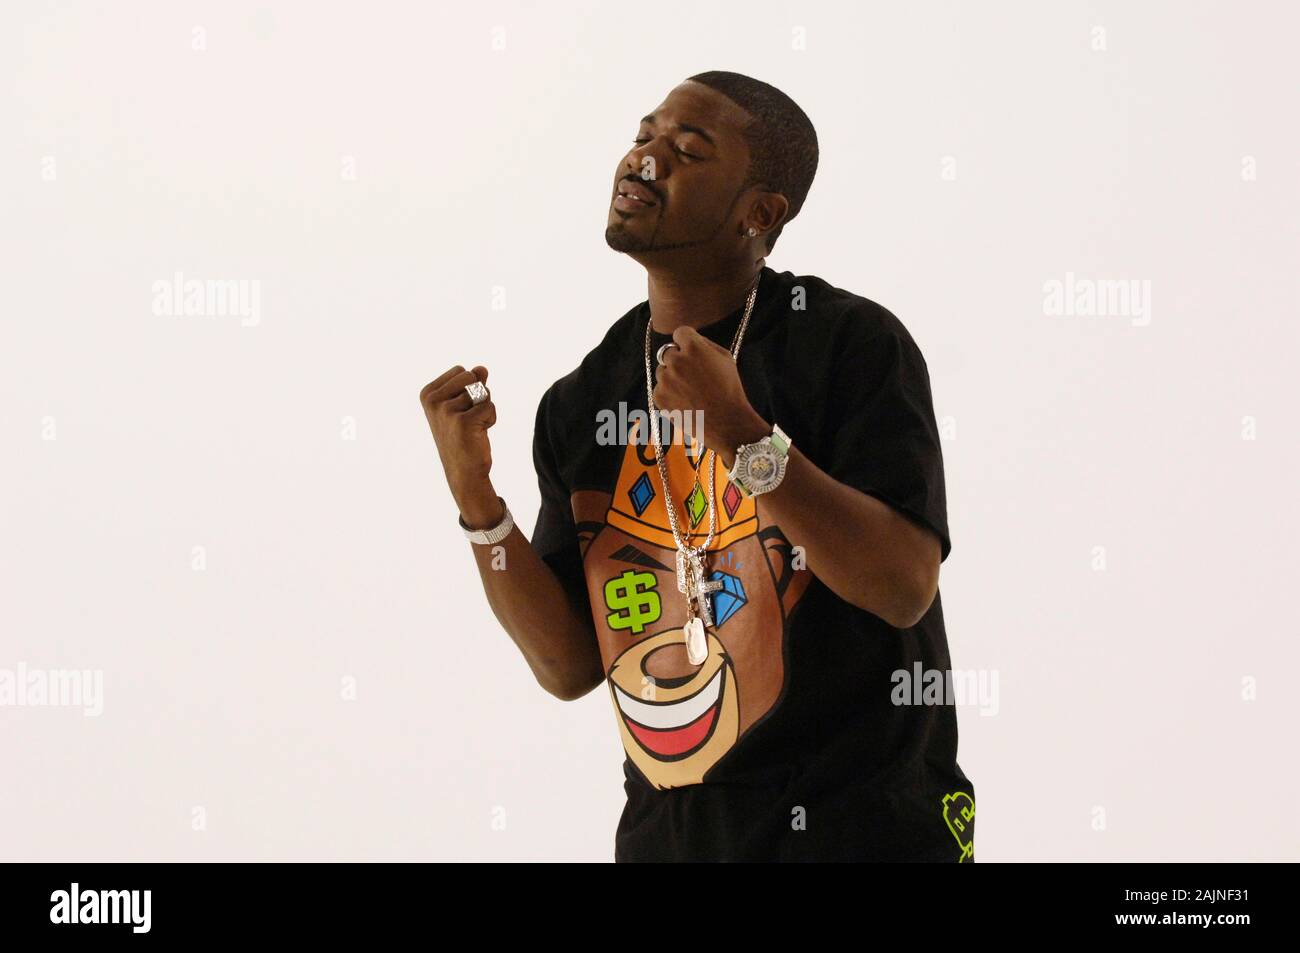 Singer / Actor Ray J on set at New Boyz featuring Ray J 'Tie Me Down' Music Video on August 17, 2009 in Los Angeles, California. Stock Photo